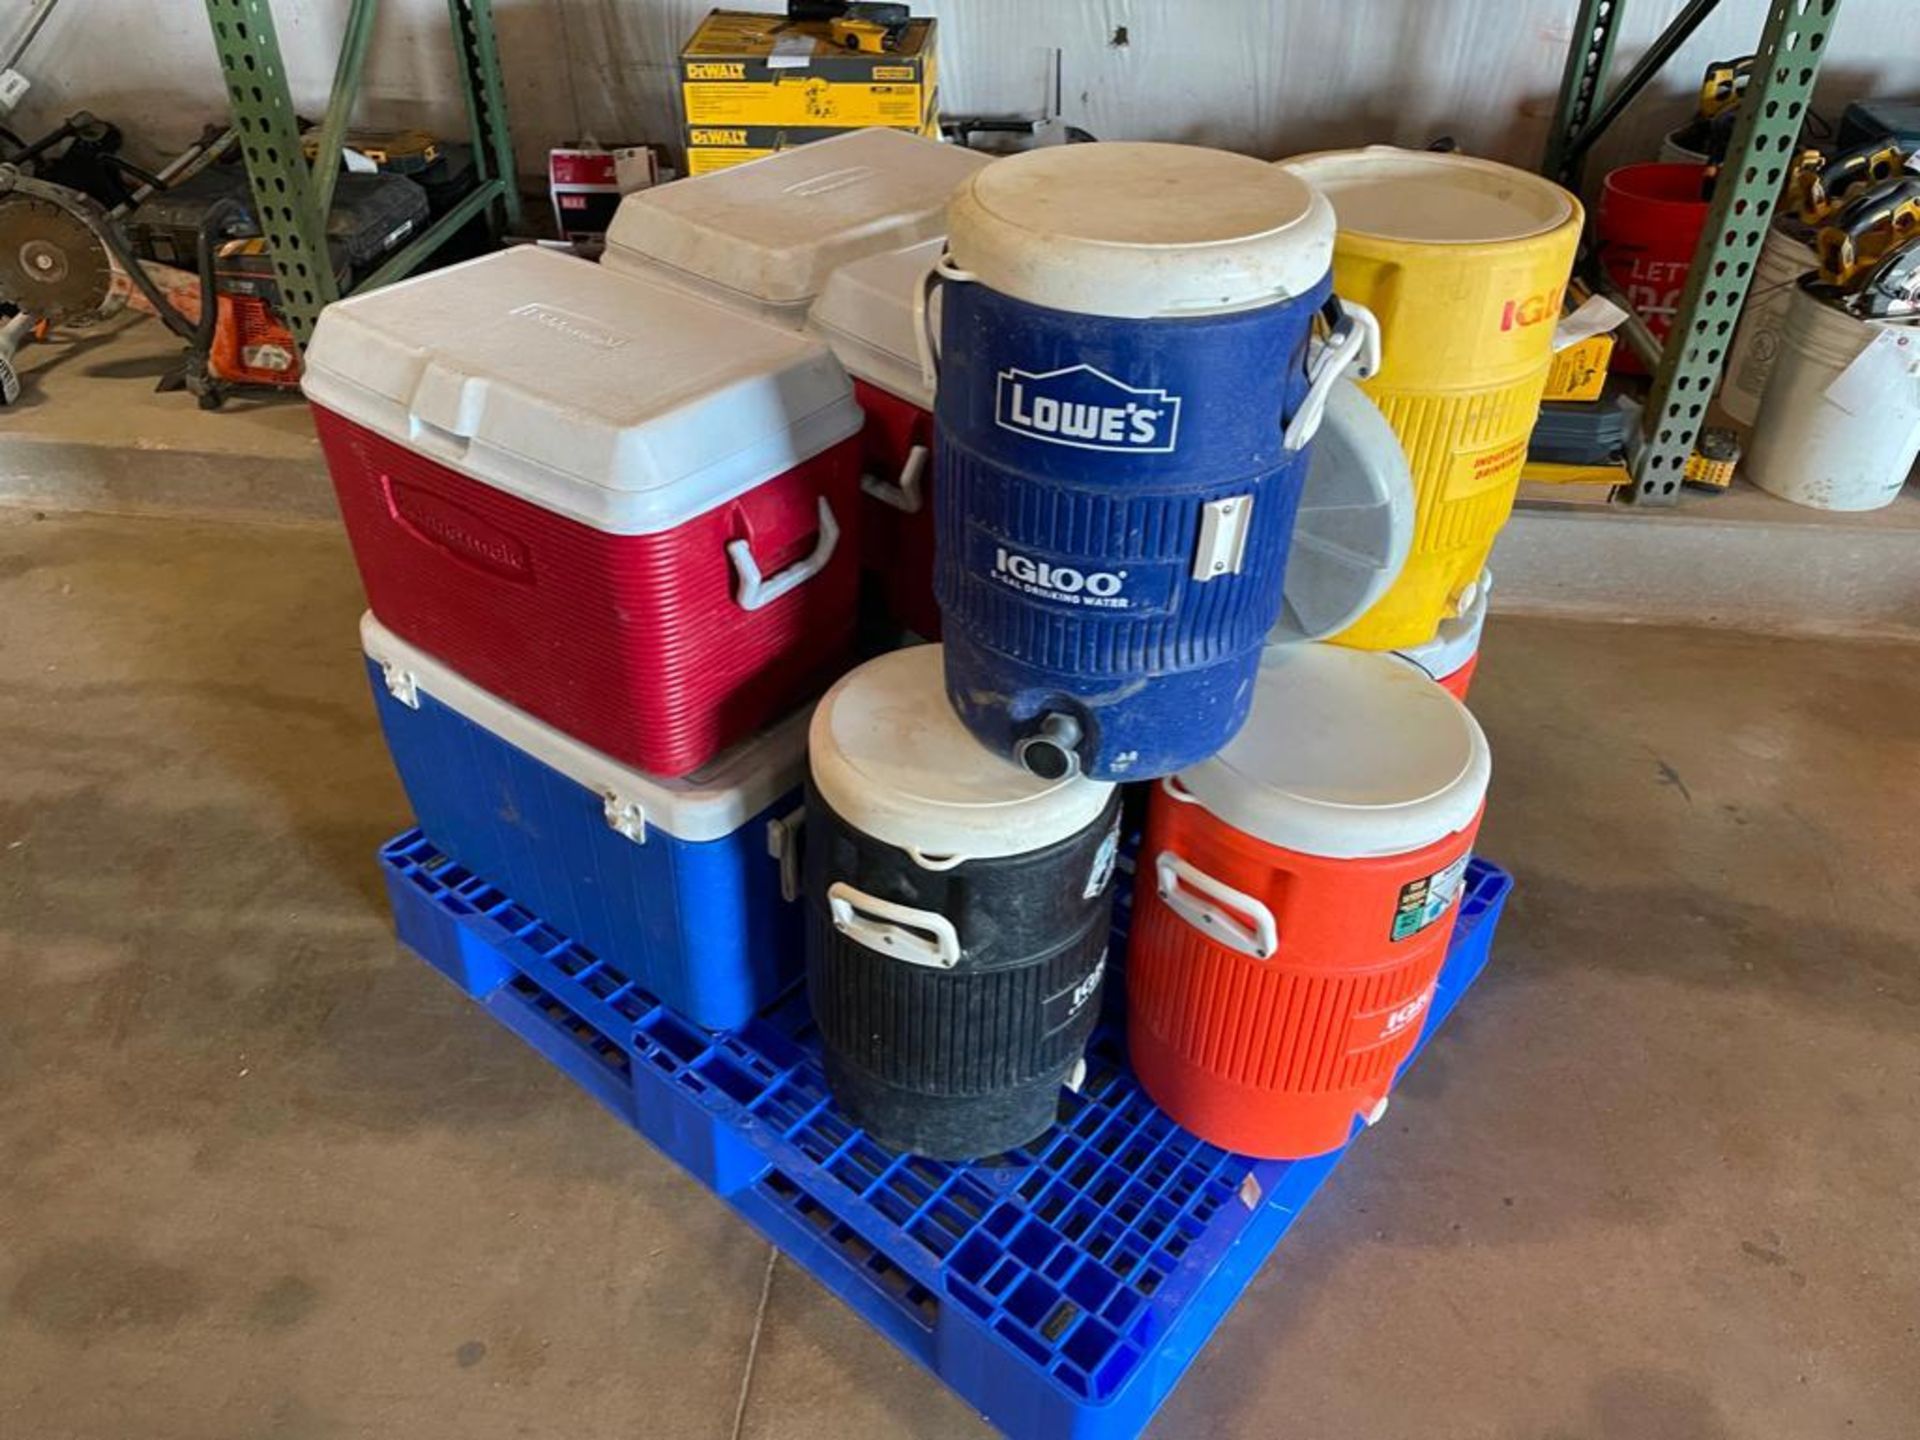 (11) Coolers, Rubbermaid Chest Coolers, Igloo Water Cooler. Located in Hazelwood, MO